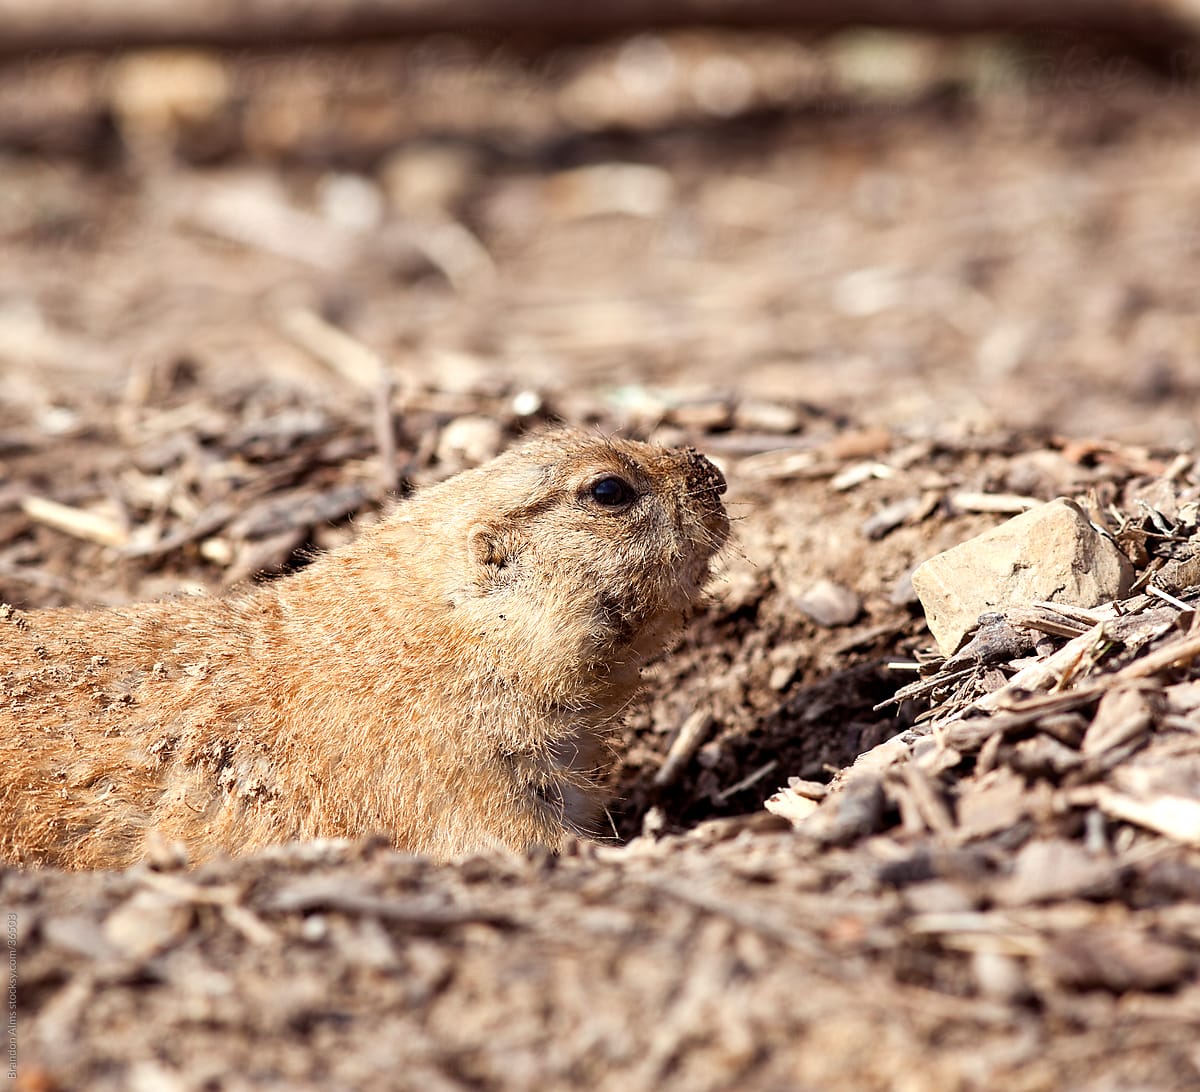 Prairie Dog Closeup Burrowed in a Hole in the Ground